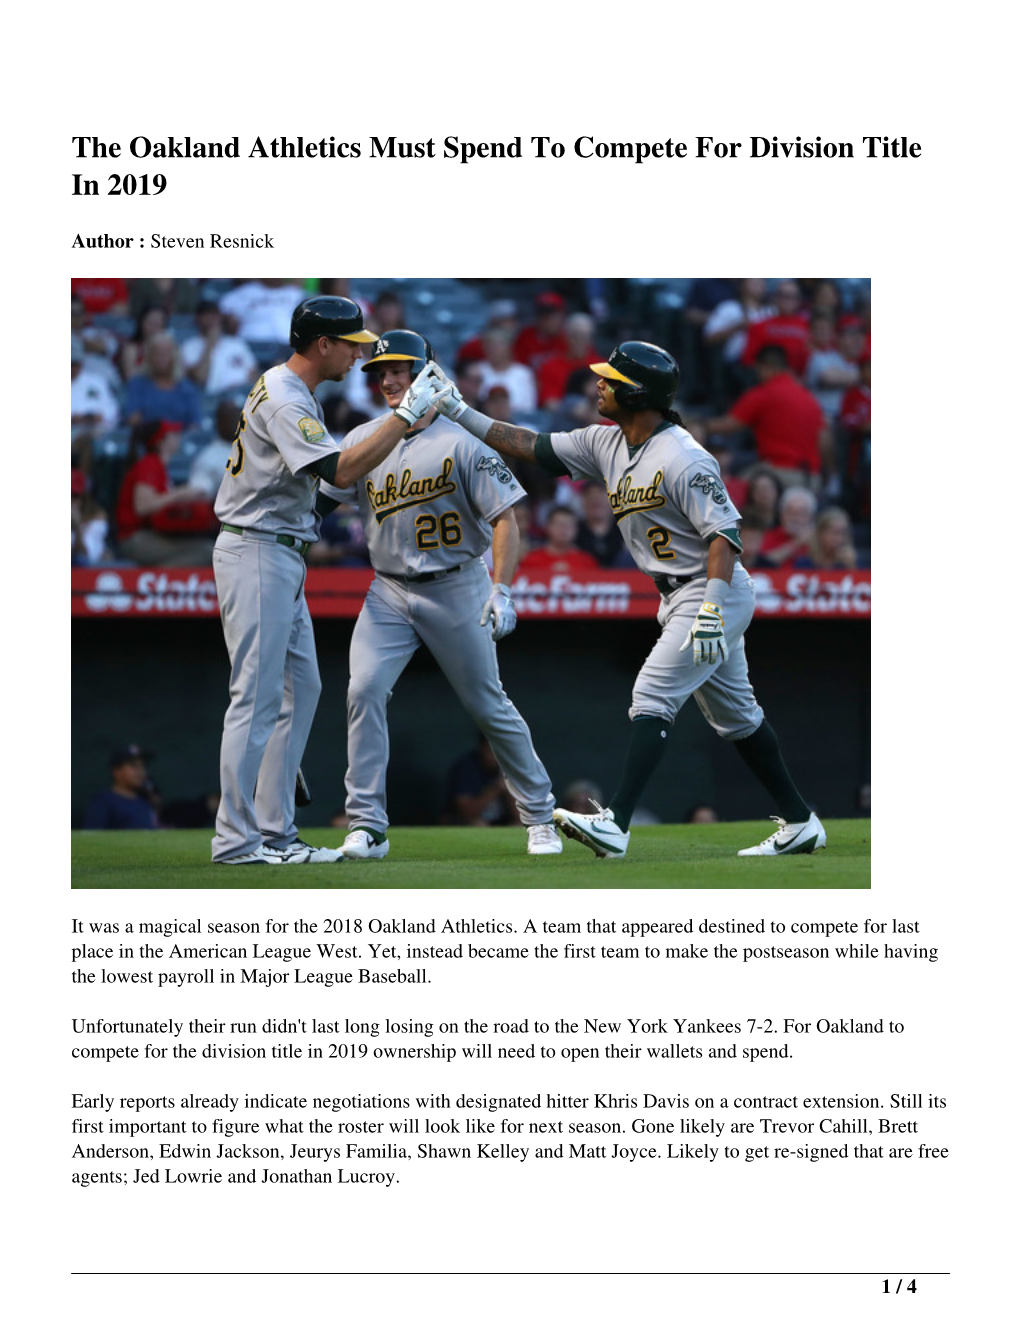 The Oakland Athletics Must Spend to Compete for Division Title in 2019